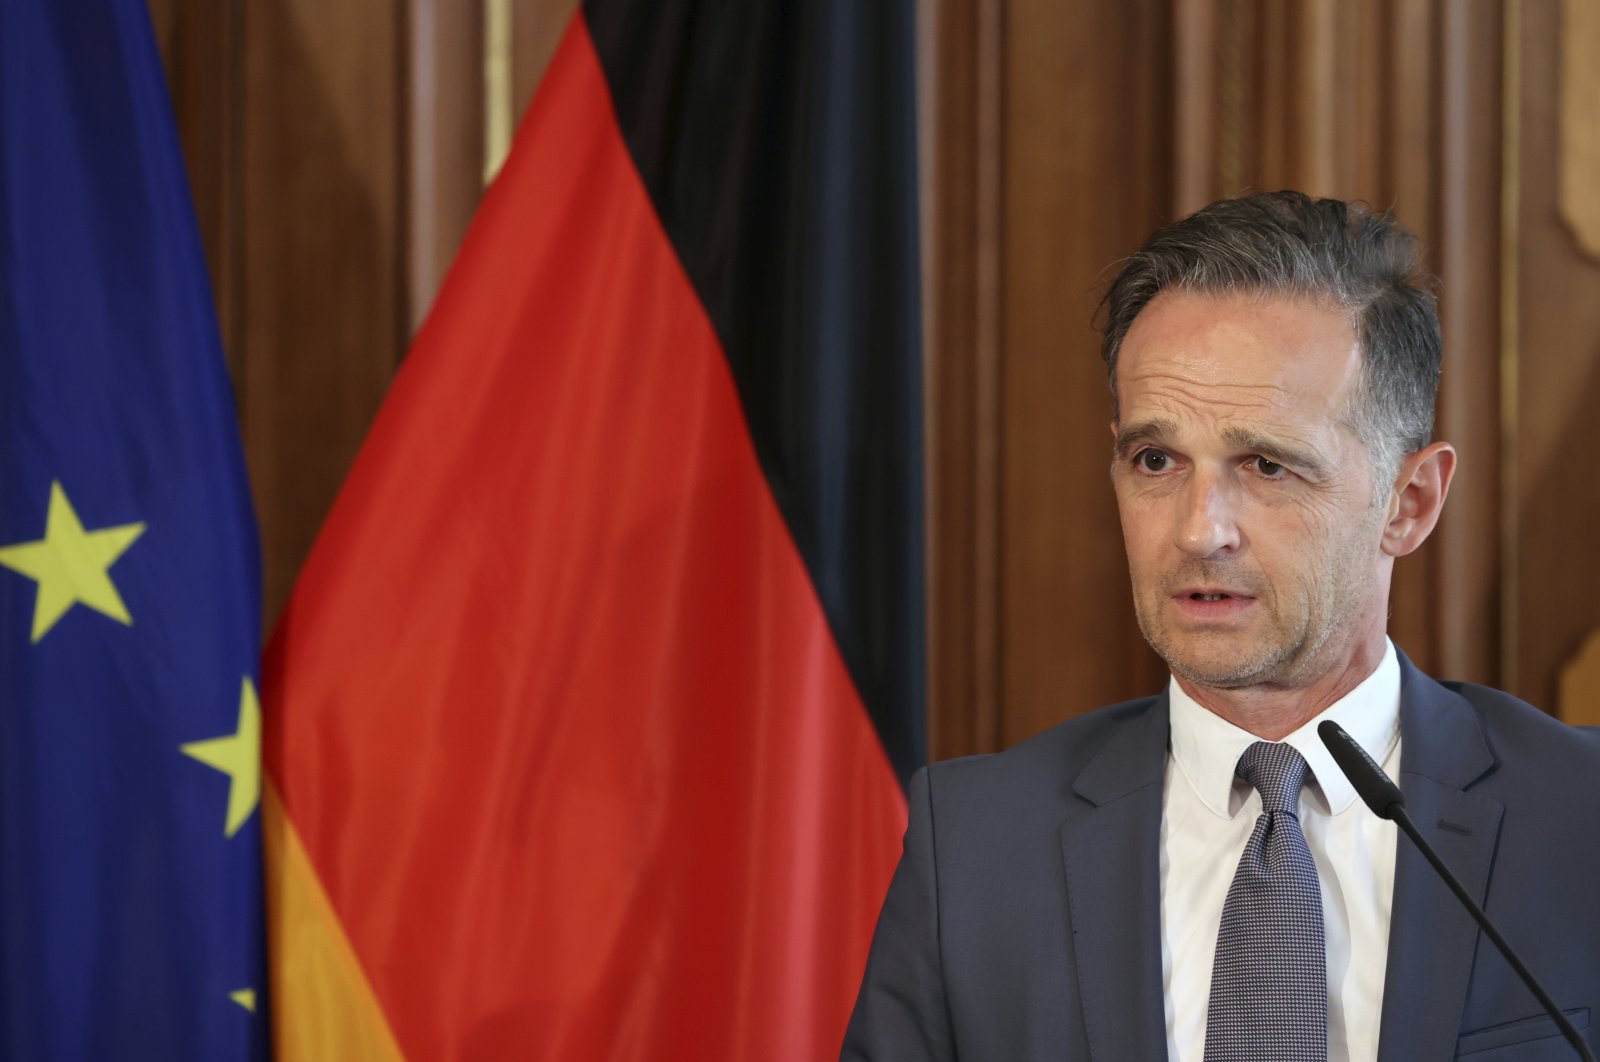 German Foreign Minister Heiko Maas addresses the media during a joint news conference with Norway's Foreign Minister Ine Marie Eriksen Soreide in Berlin, Germany, Aug. 13, 2020. (AP Photo)